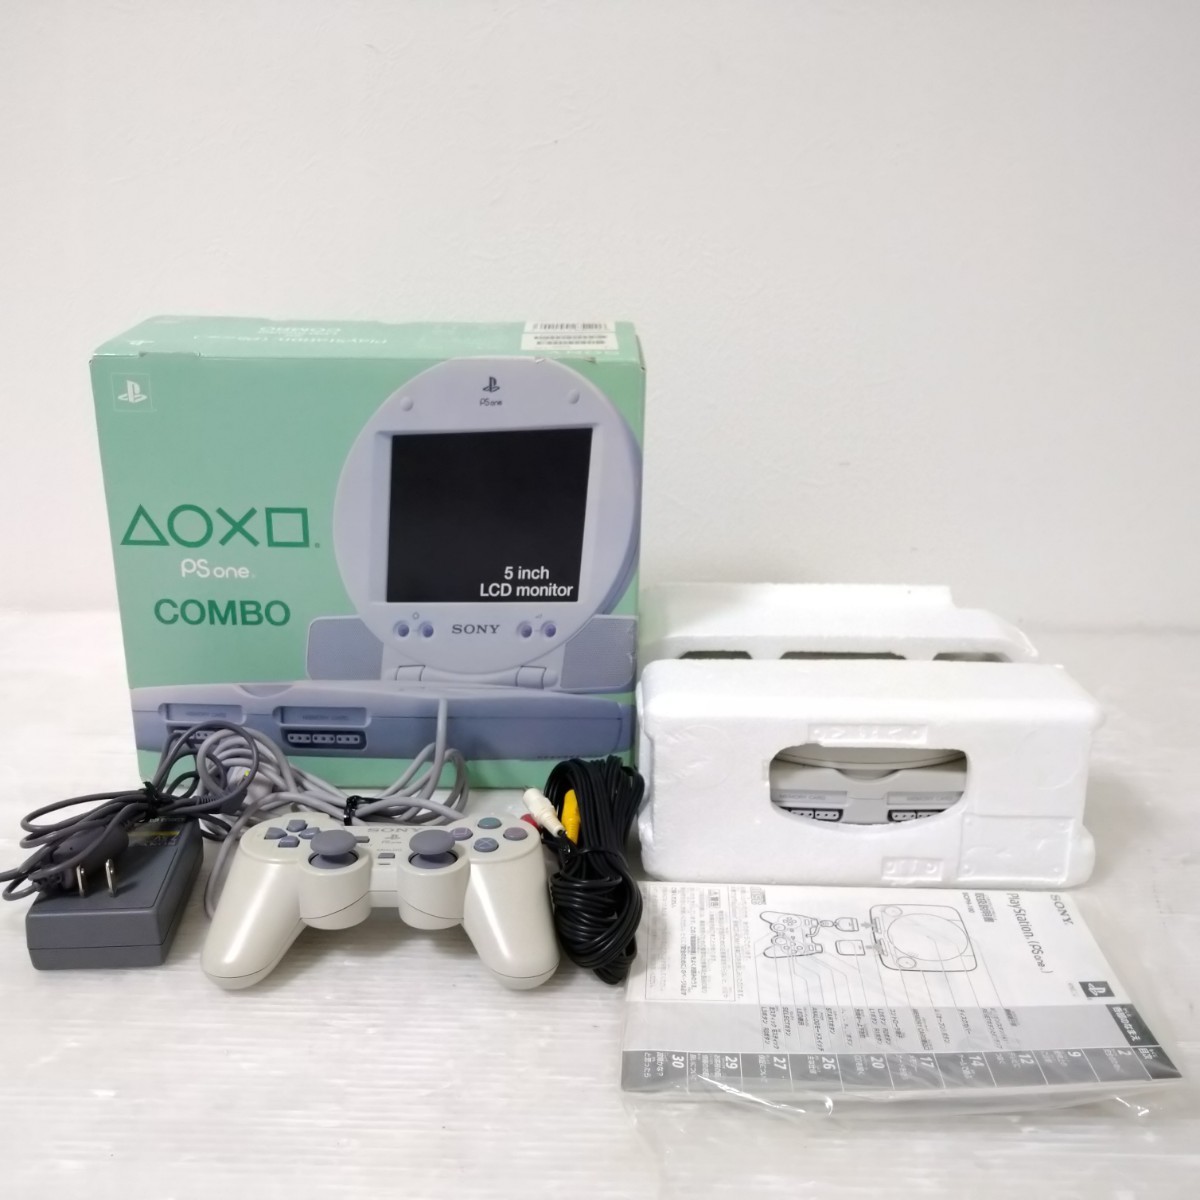 PSone COMBO SCPH-140 PlayStation and LCD monitor PS1 液晶モニター付き プレイステーション SCPH-100 SCPH-130 動作品